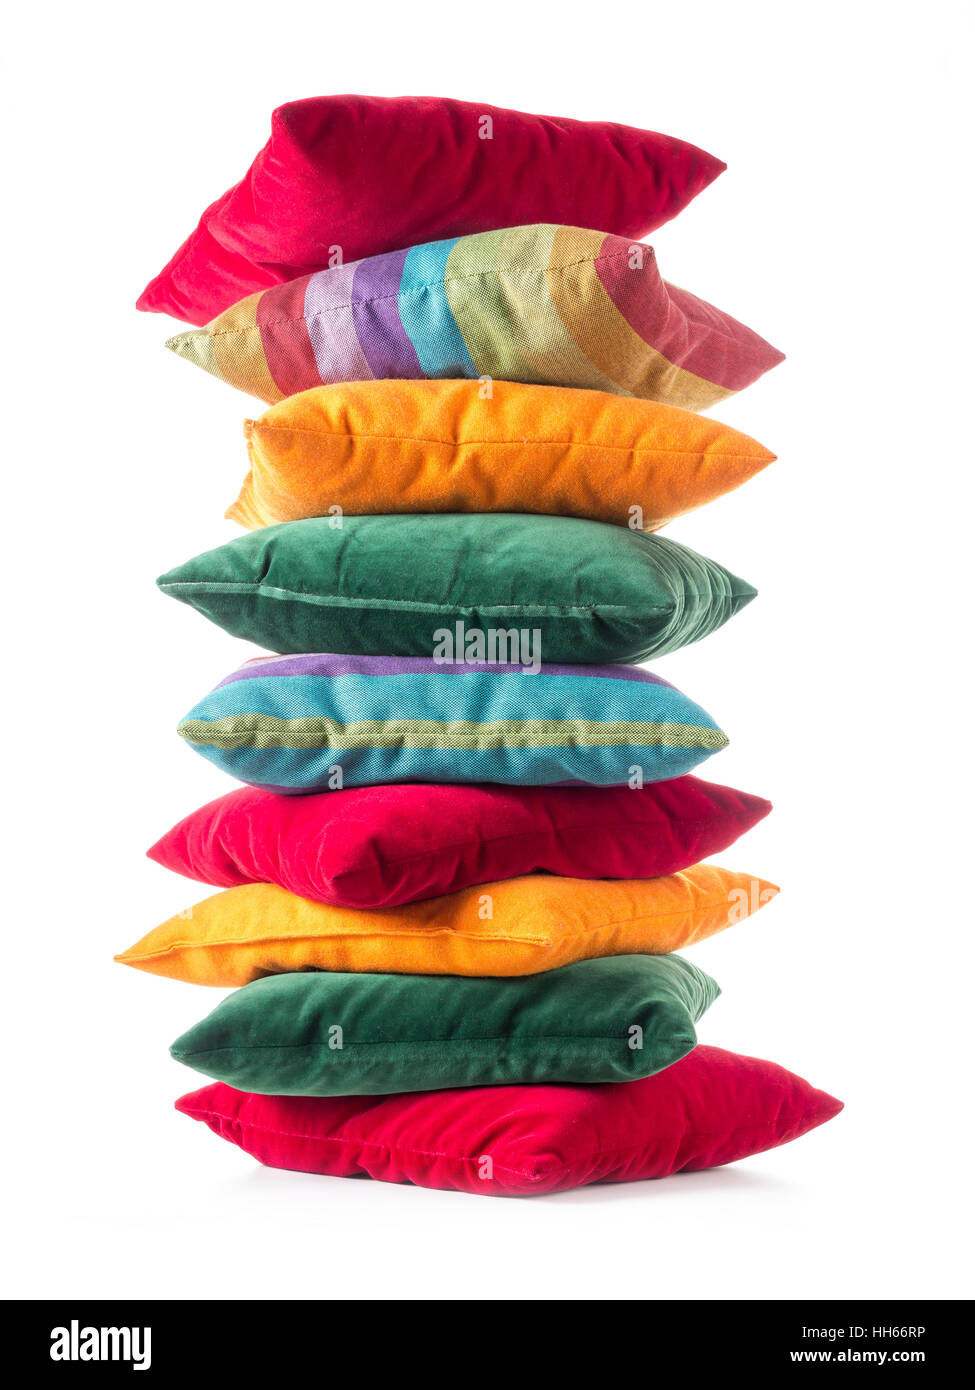 Pile of colorful pillows over white background Stock Photo